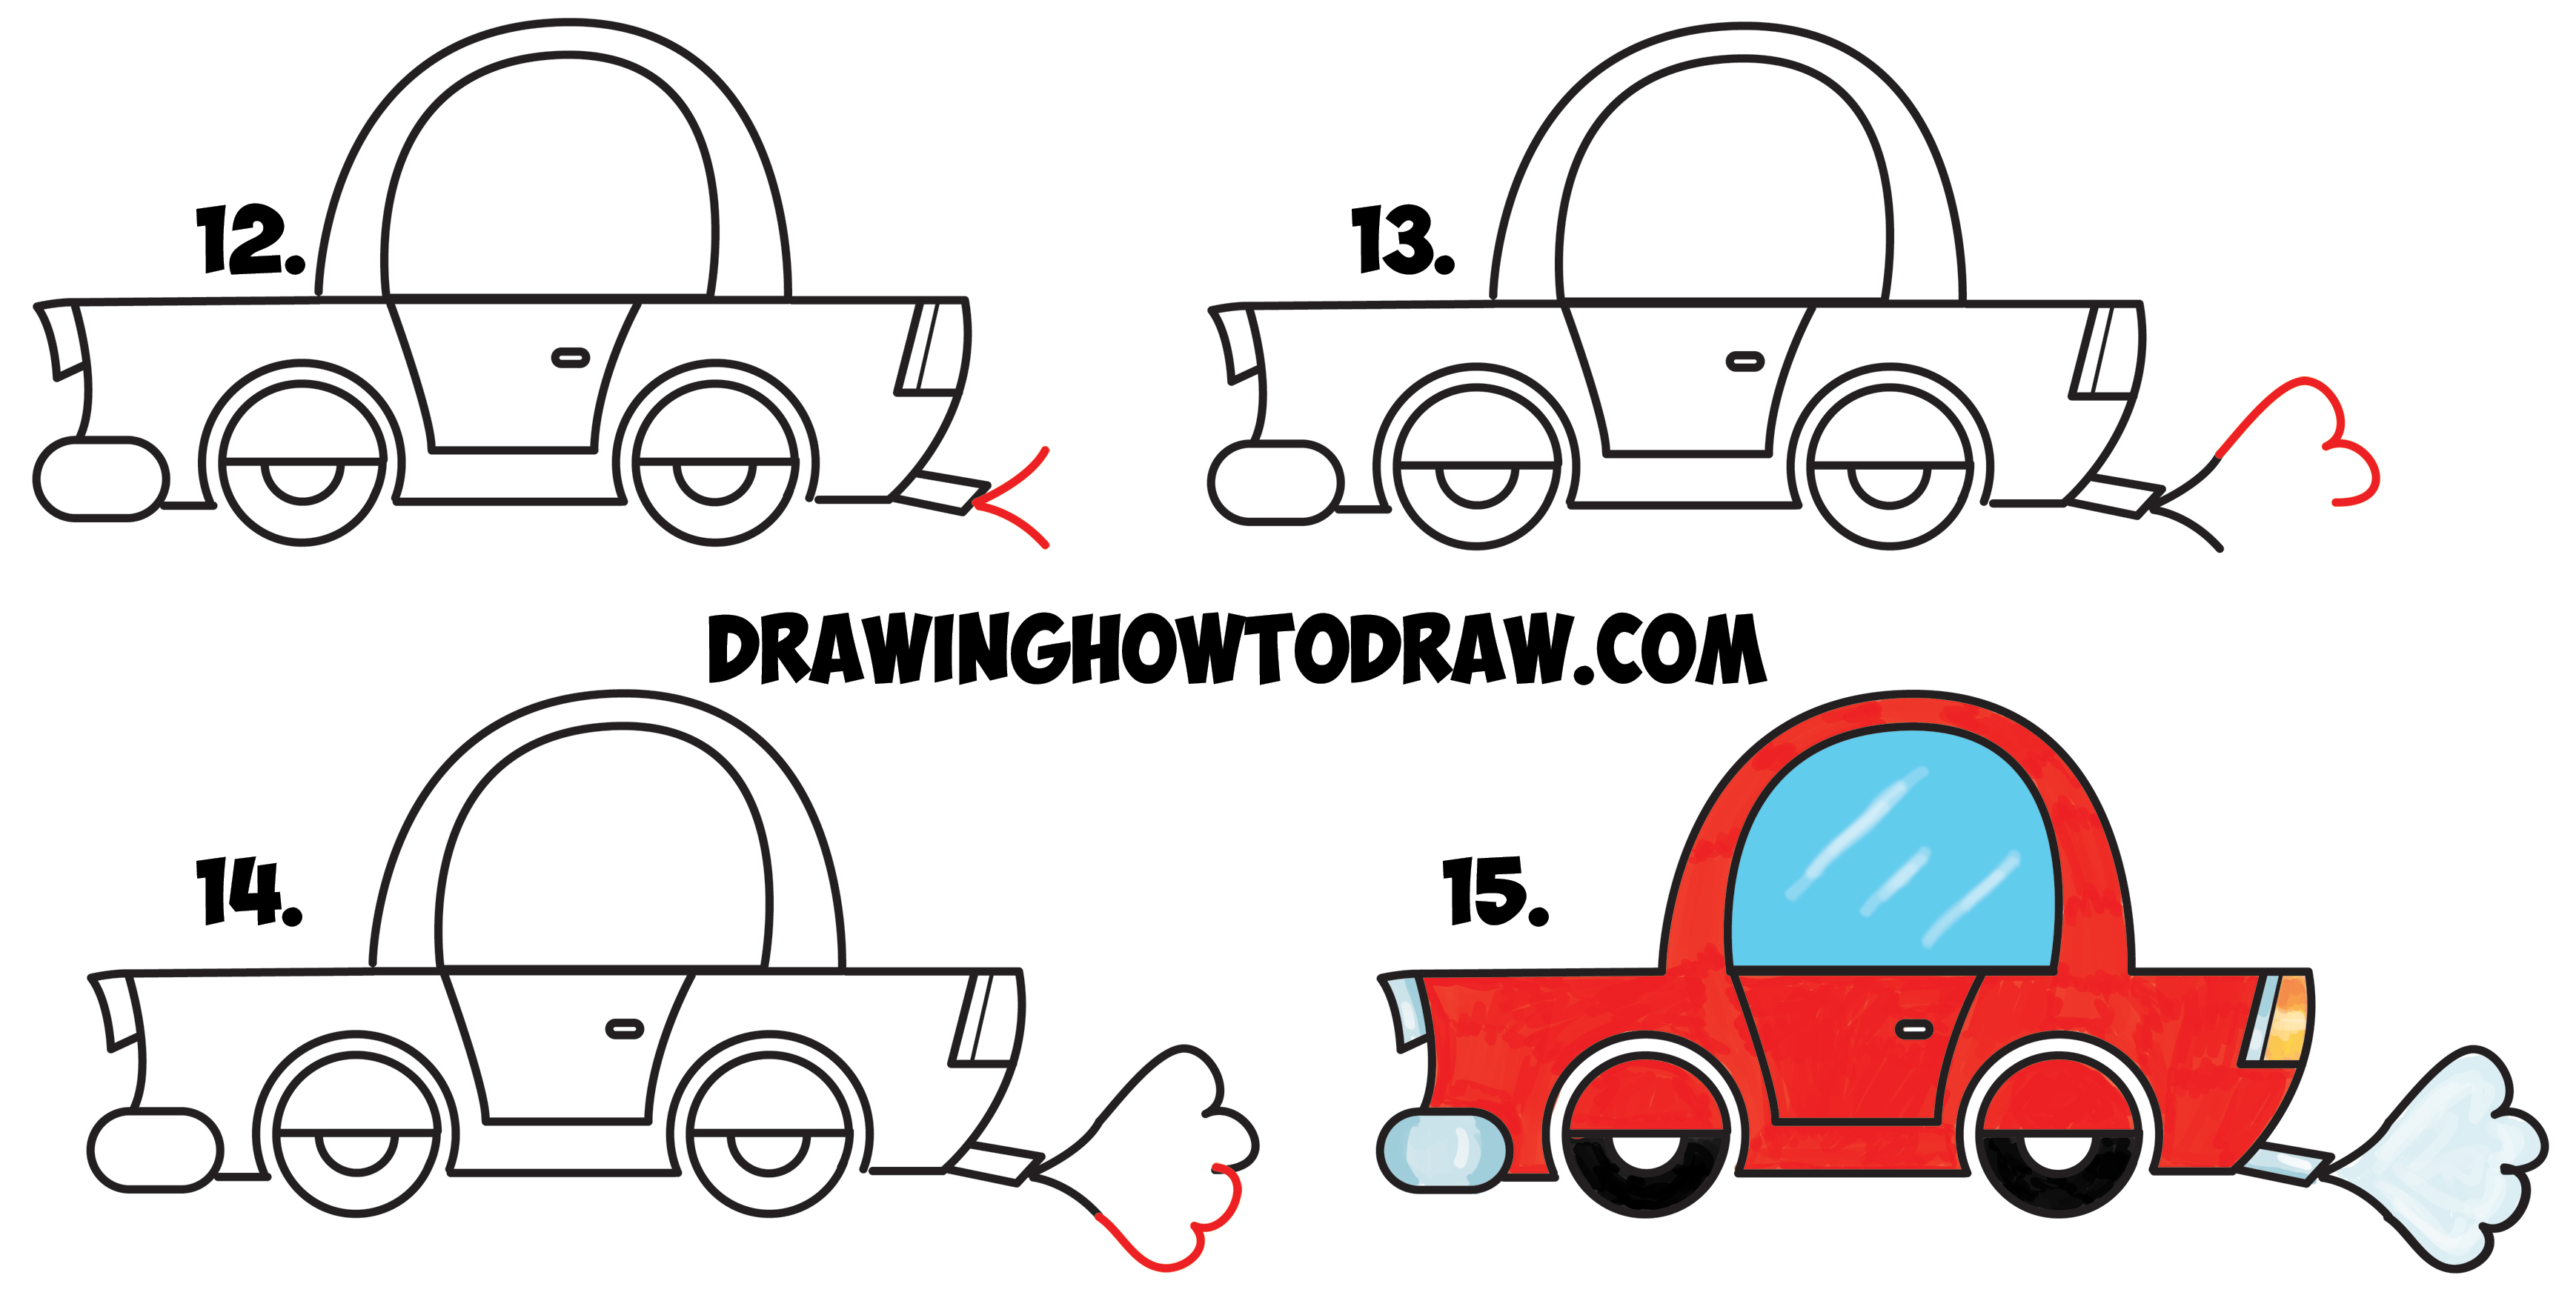 How to draw a car #2 | Easy drawings - YouTube